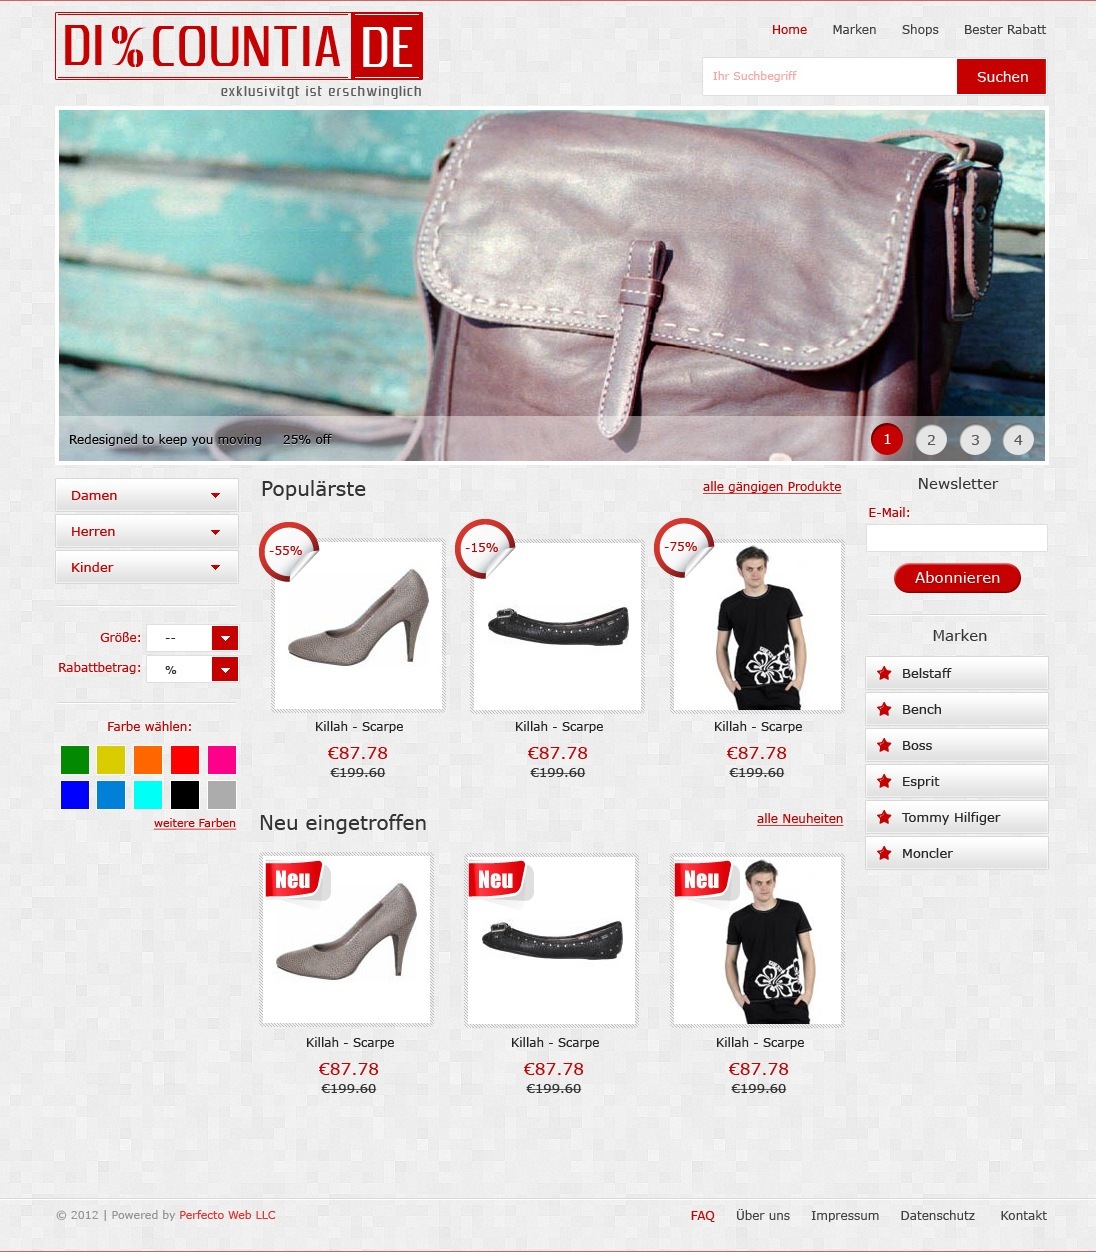 Discountia №1- Home page